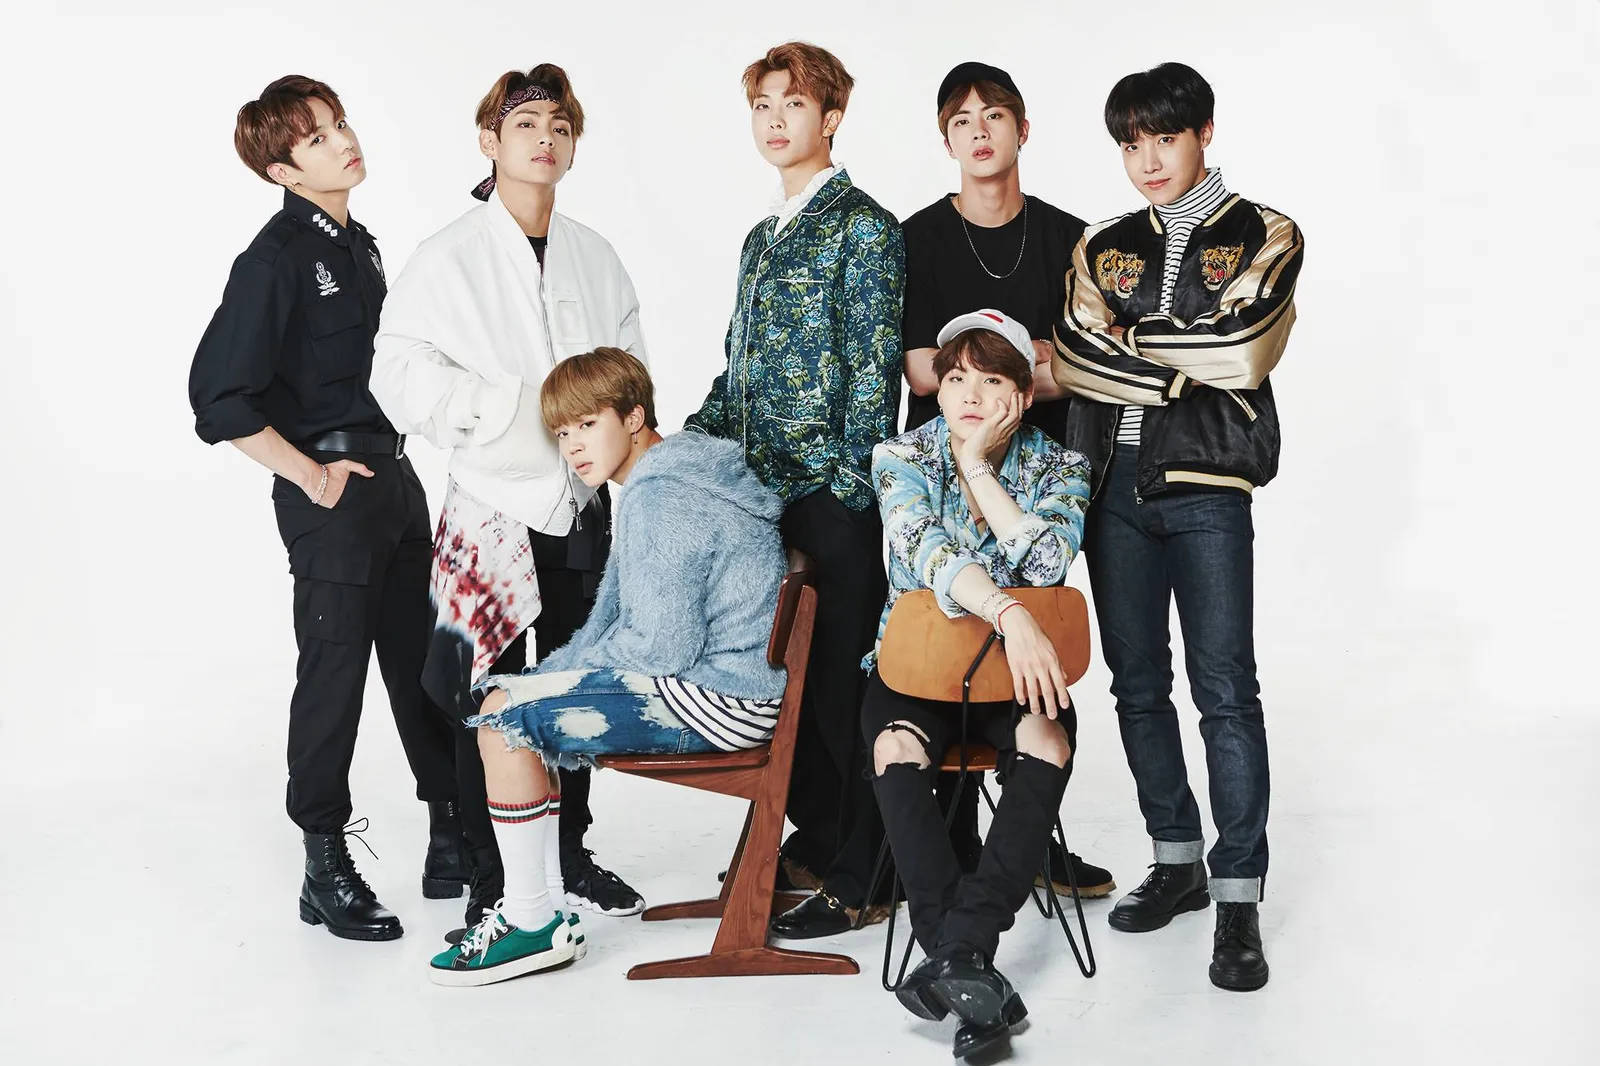 Cute Bts Group Posing Together On White Backdrop Wallpaper